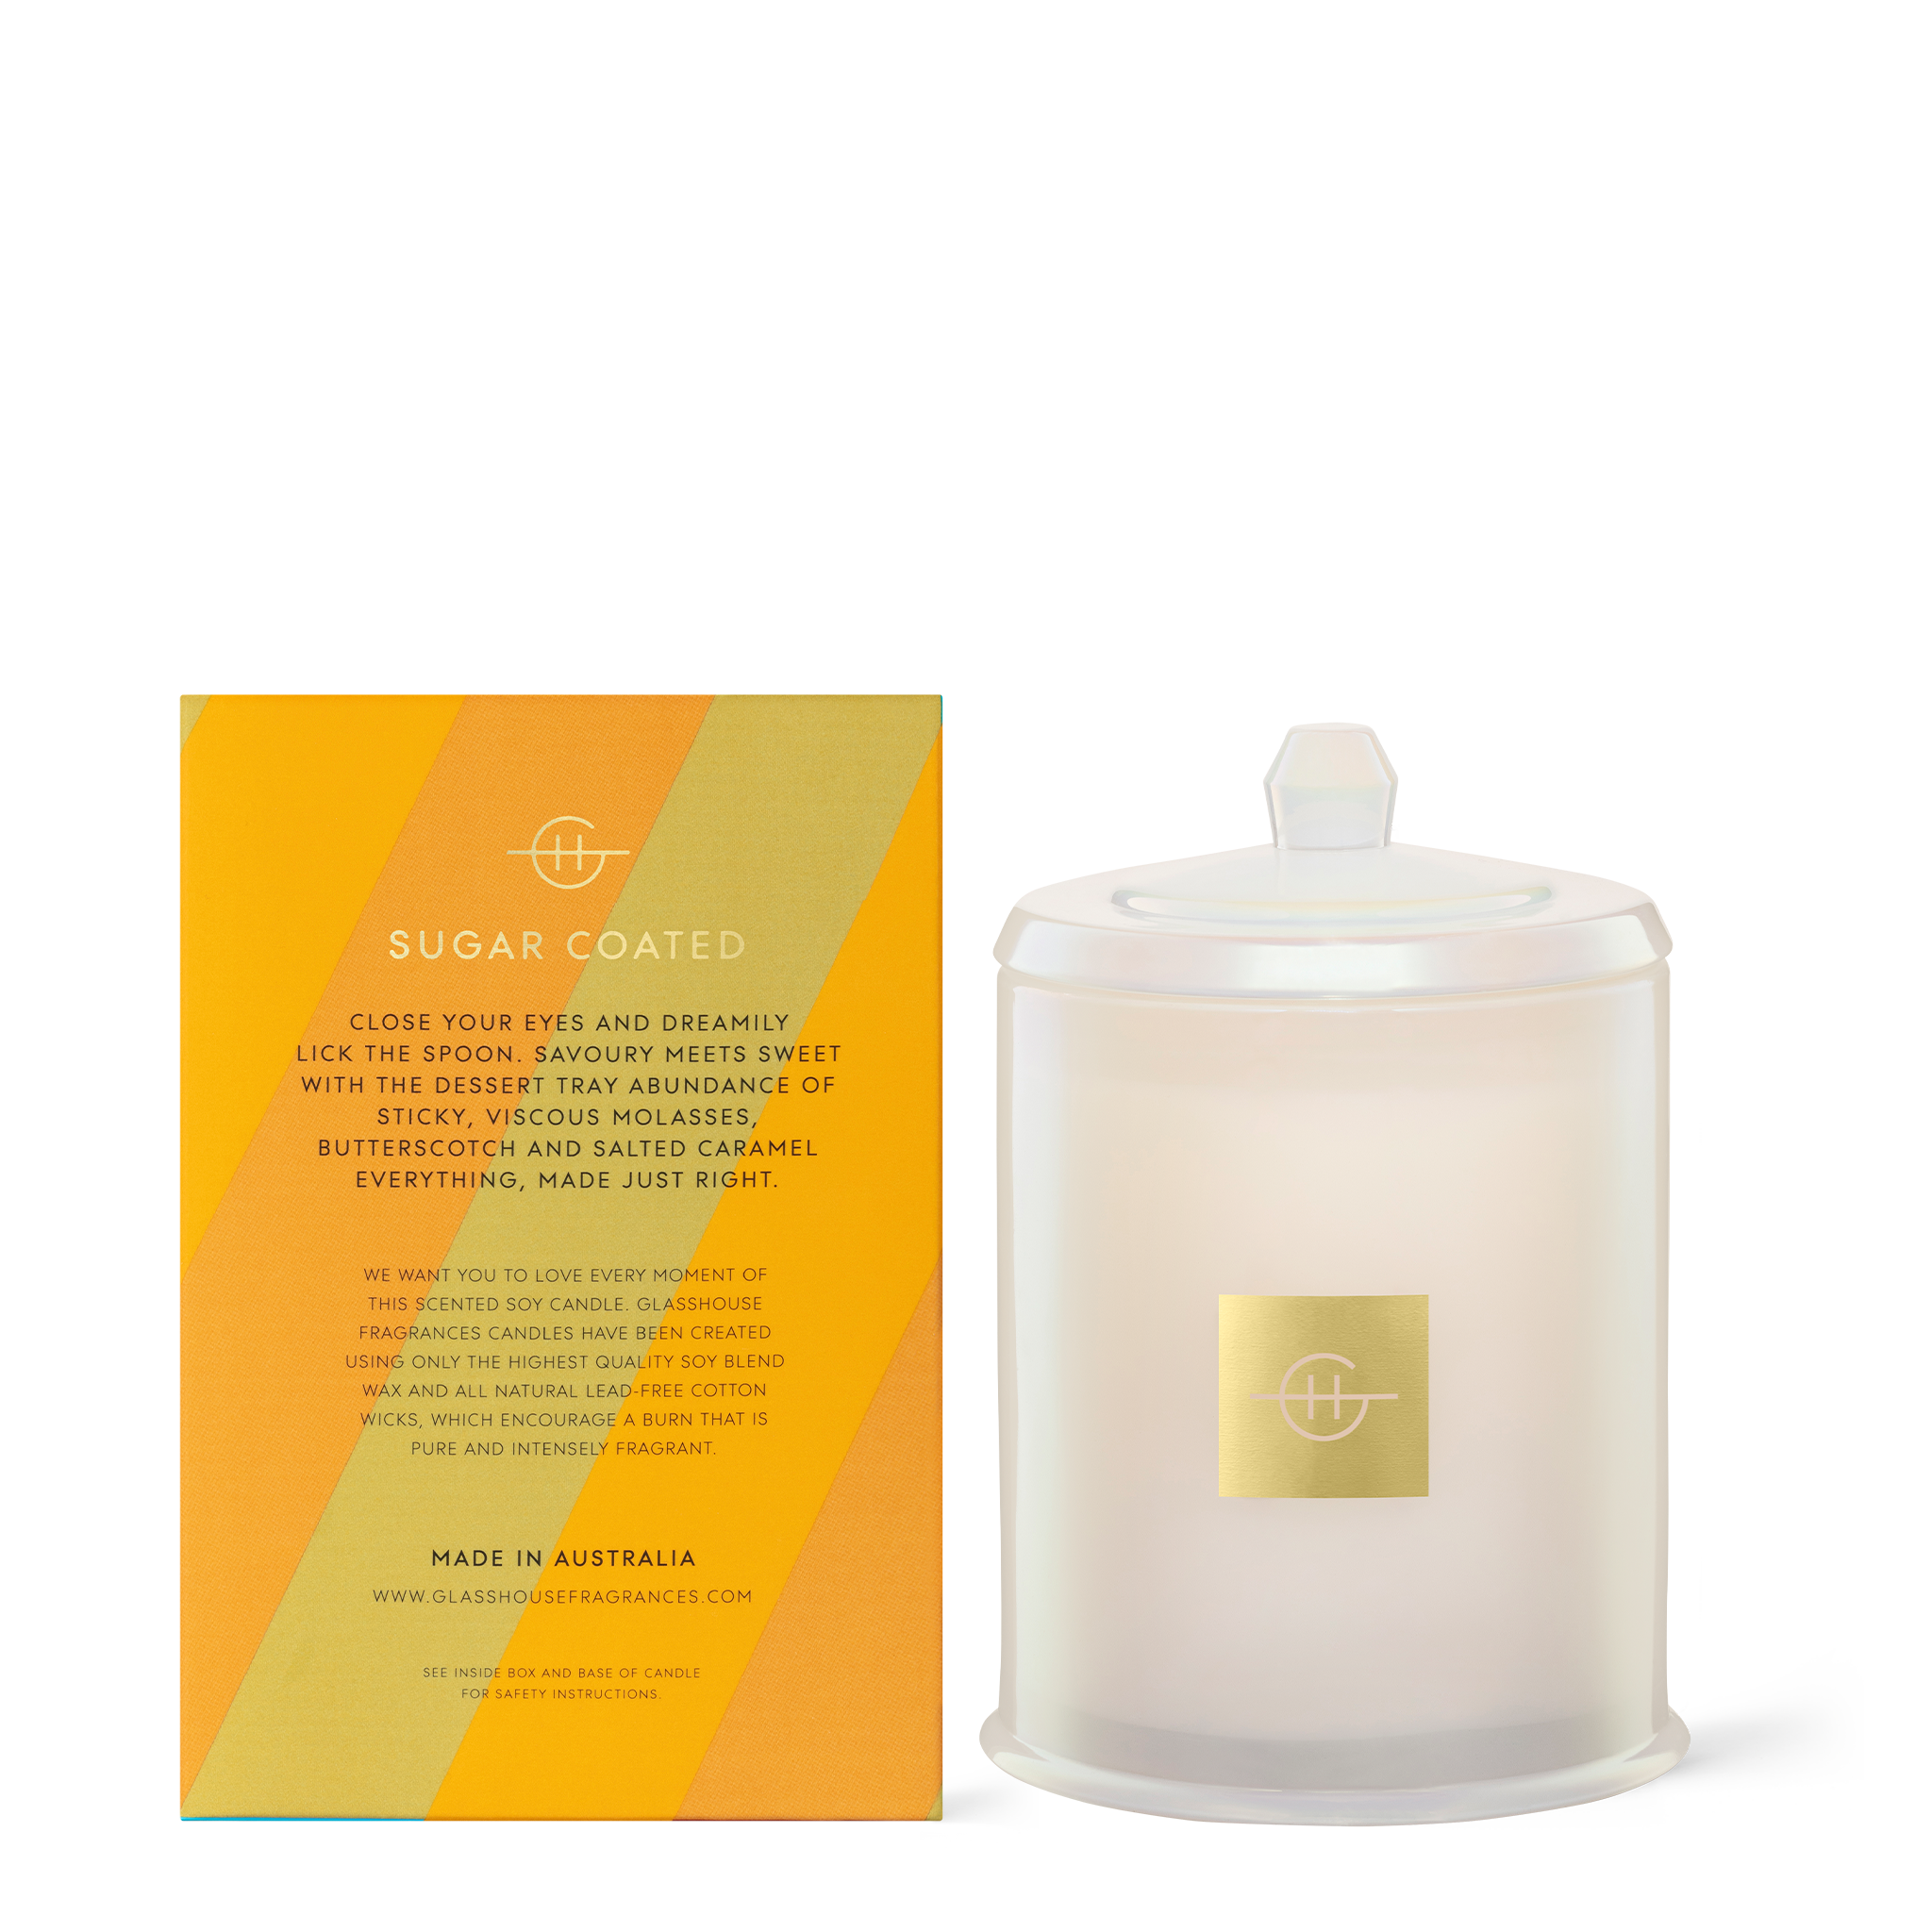 Glasshouse Fragrances Sweet Enough Salted Caramel 380g Soy Candle with box - back of product shot